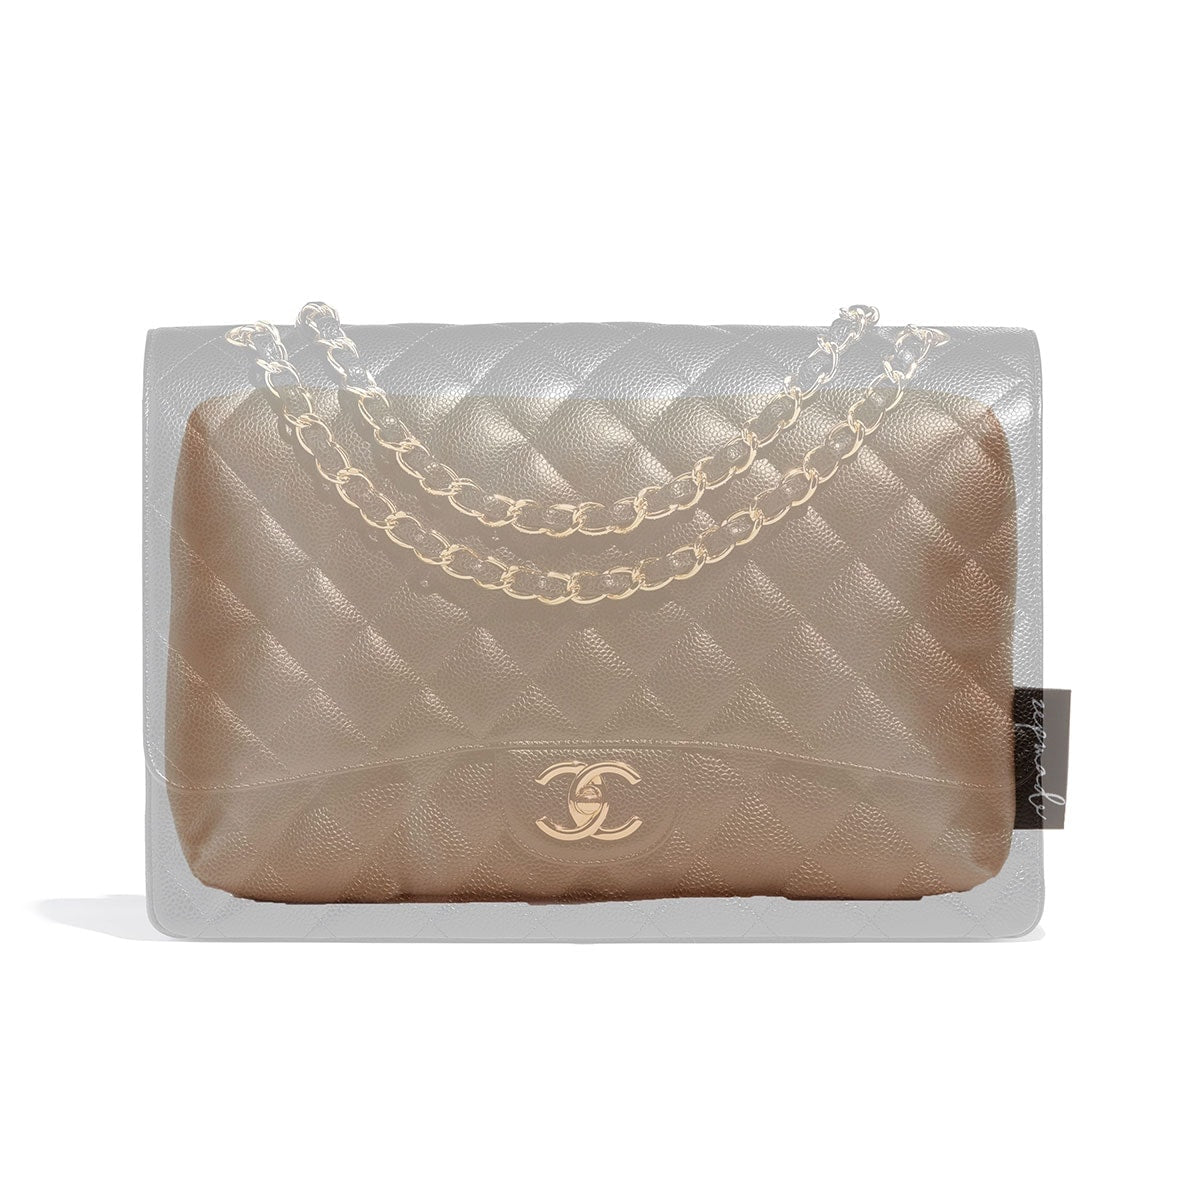 Bag-a-vie Purse Pillow Insert Fits Chanel Maxi Flap for 